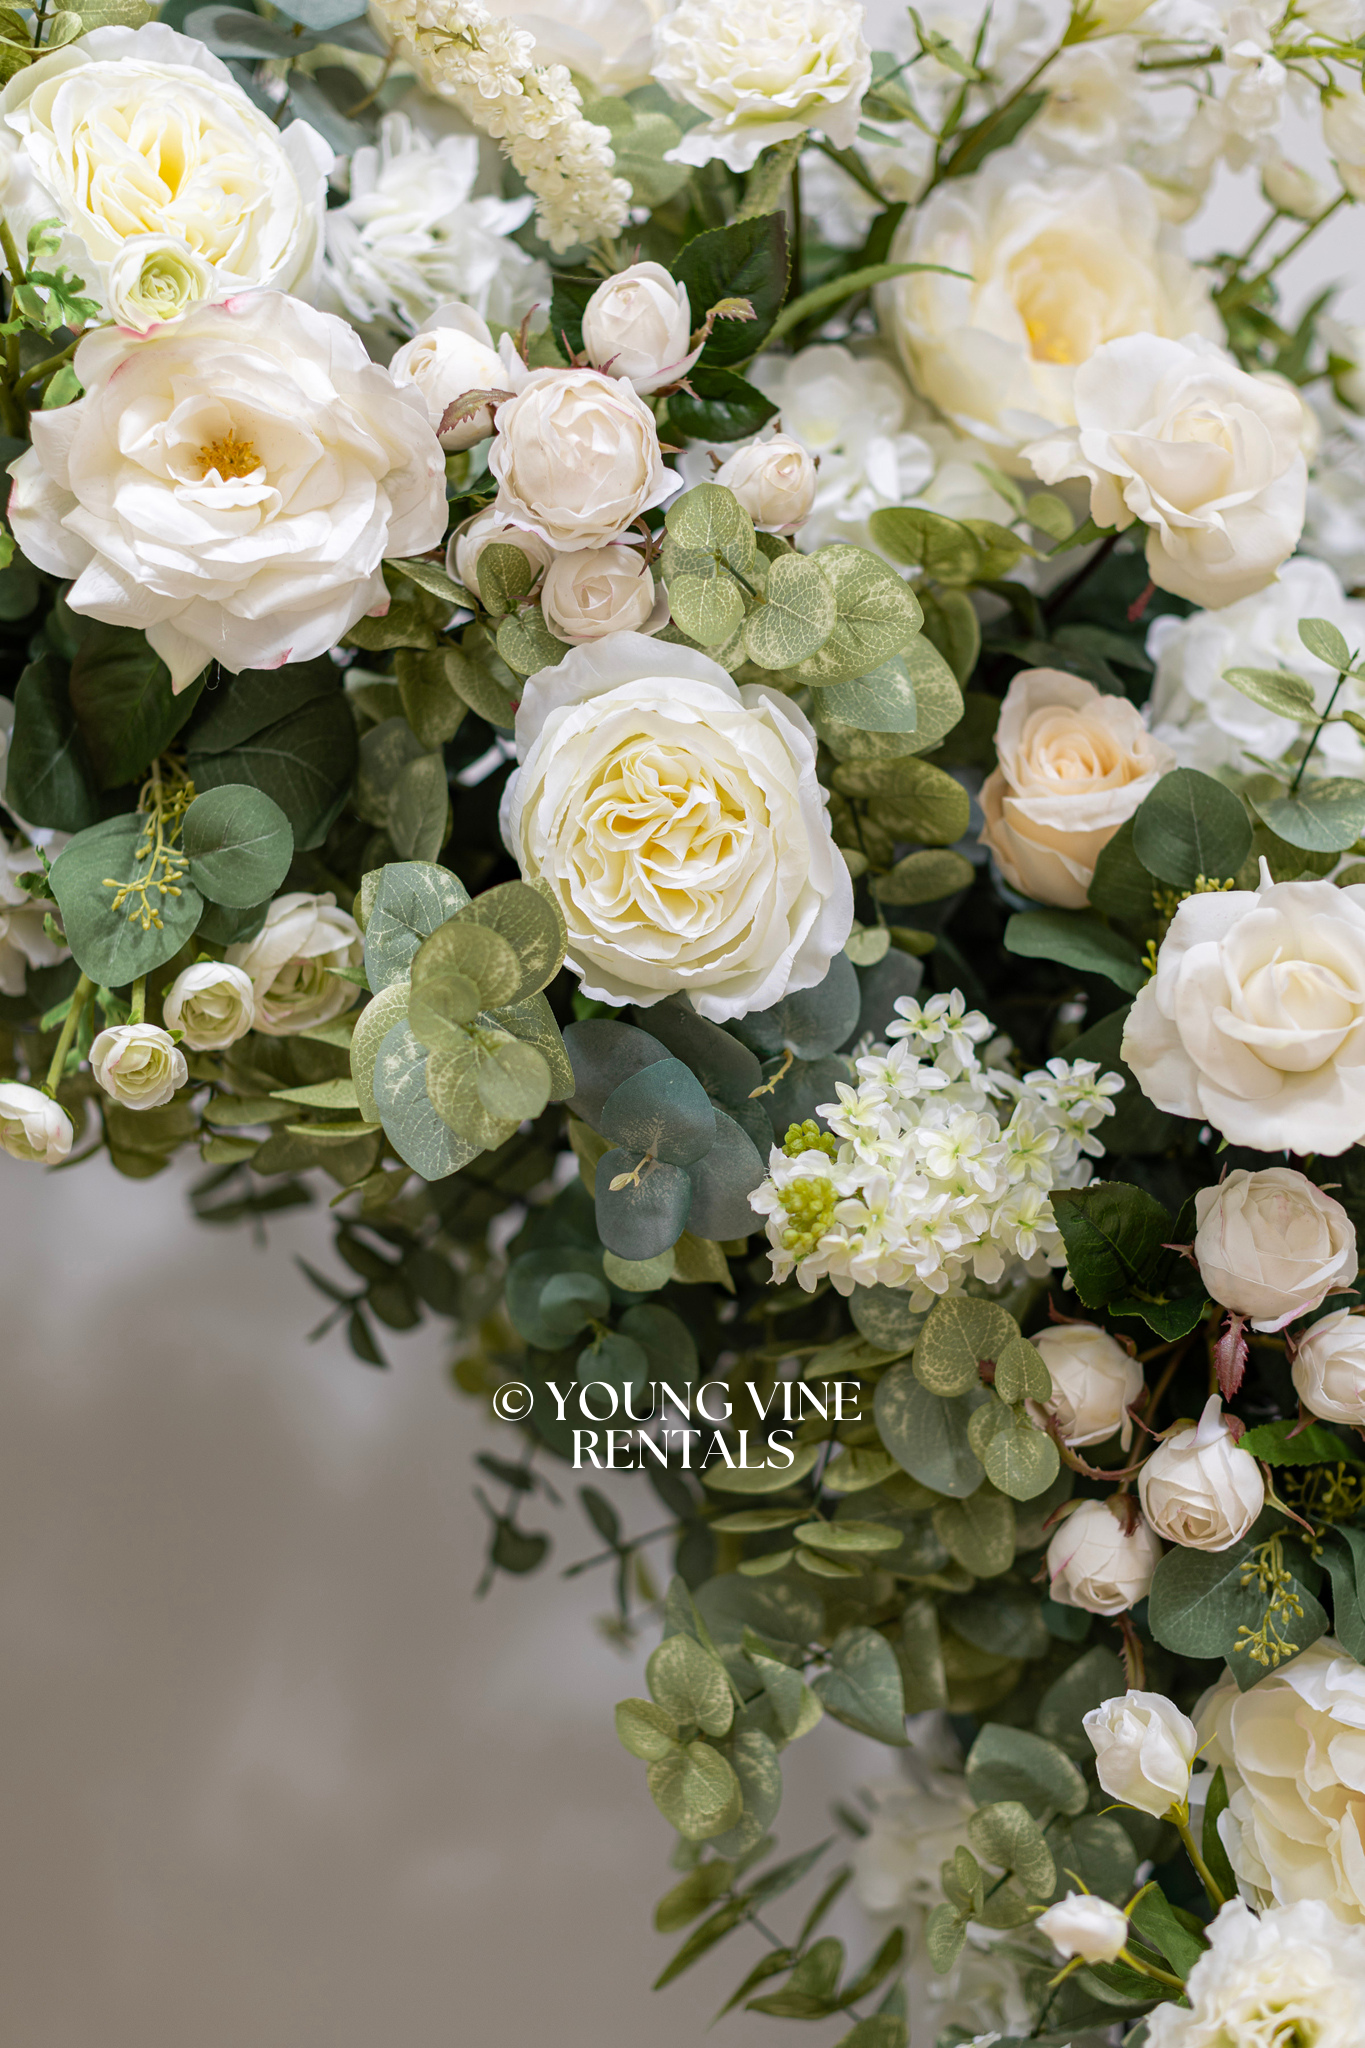 Close-up detail shot of lush, romantic wedding floral arbor studded with an abundance of ivory and white flowers and various types of eucalyptus foliage.